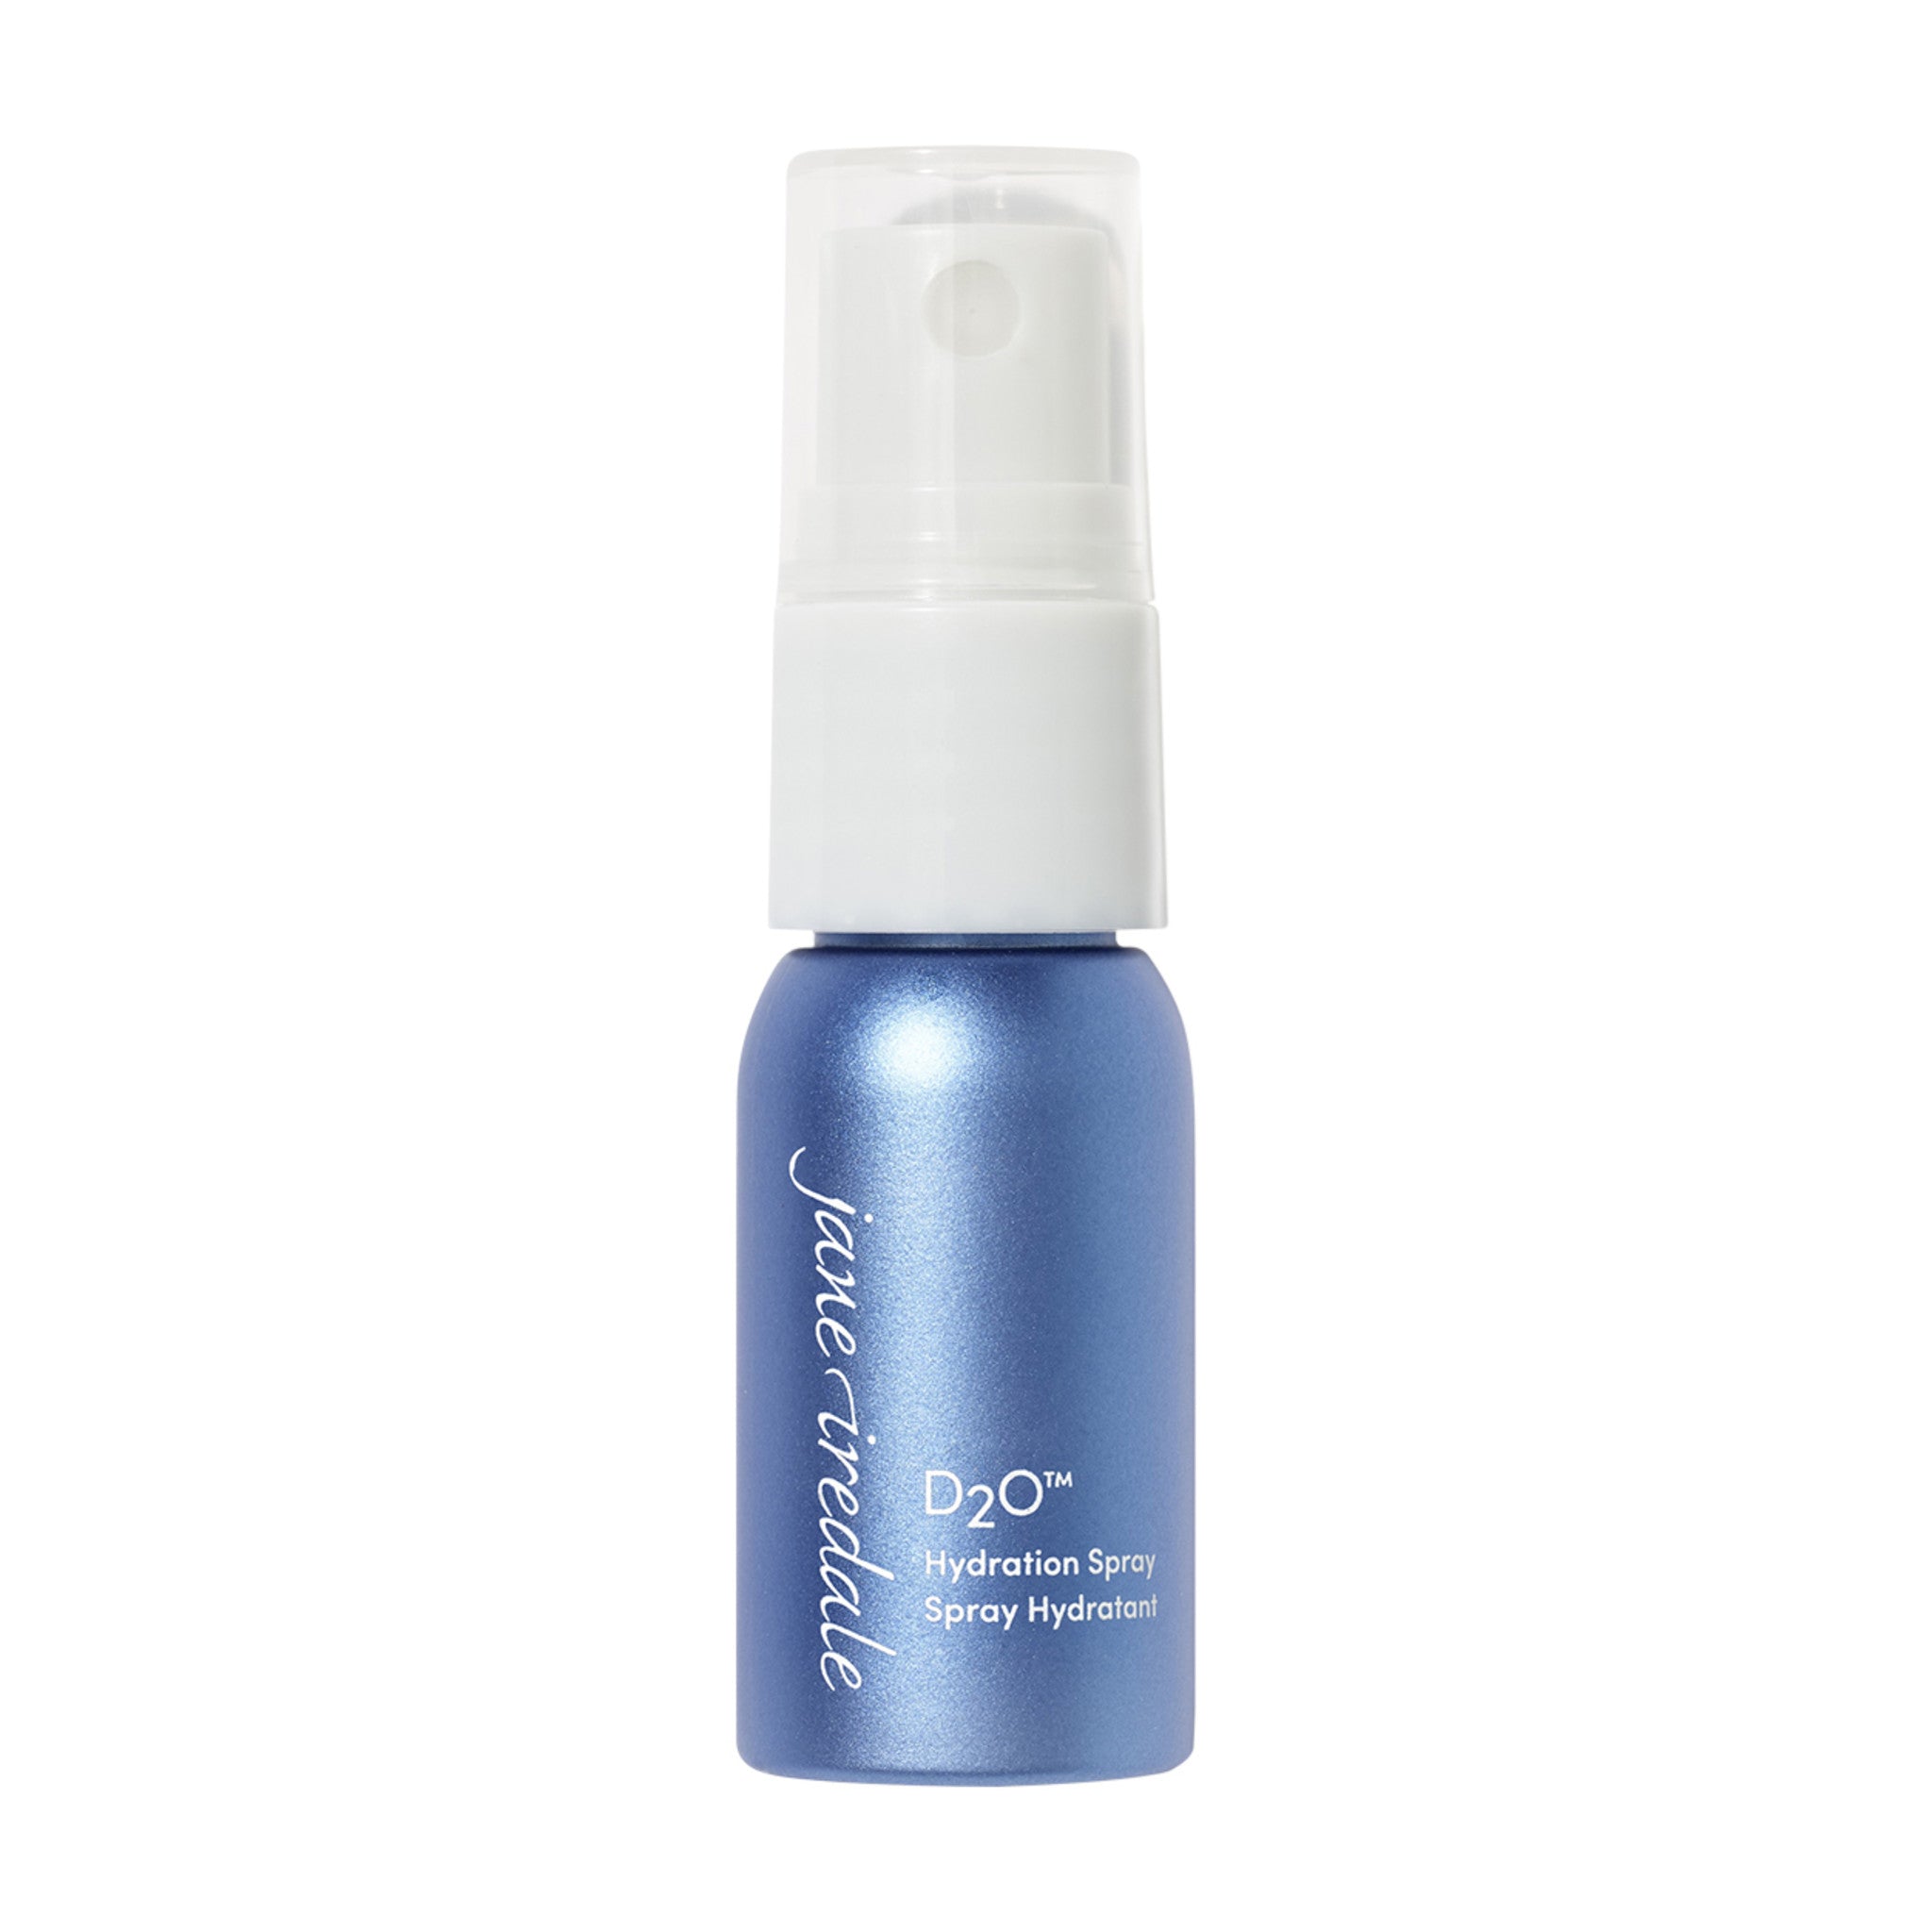 Jane Iredale D2O Hydration Spray Size variant: 12 ml main image.